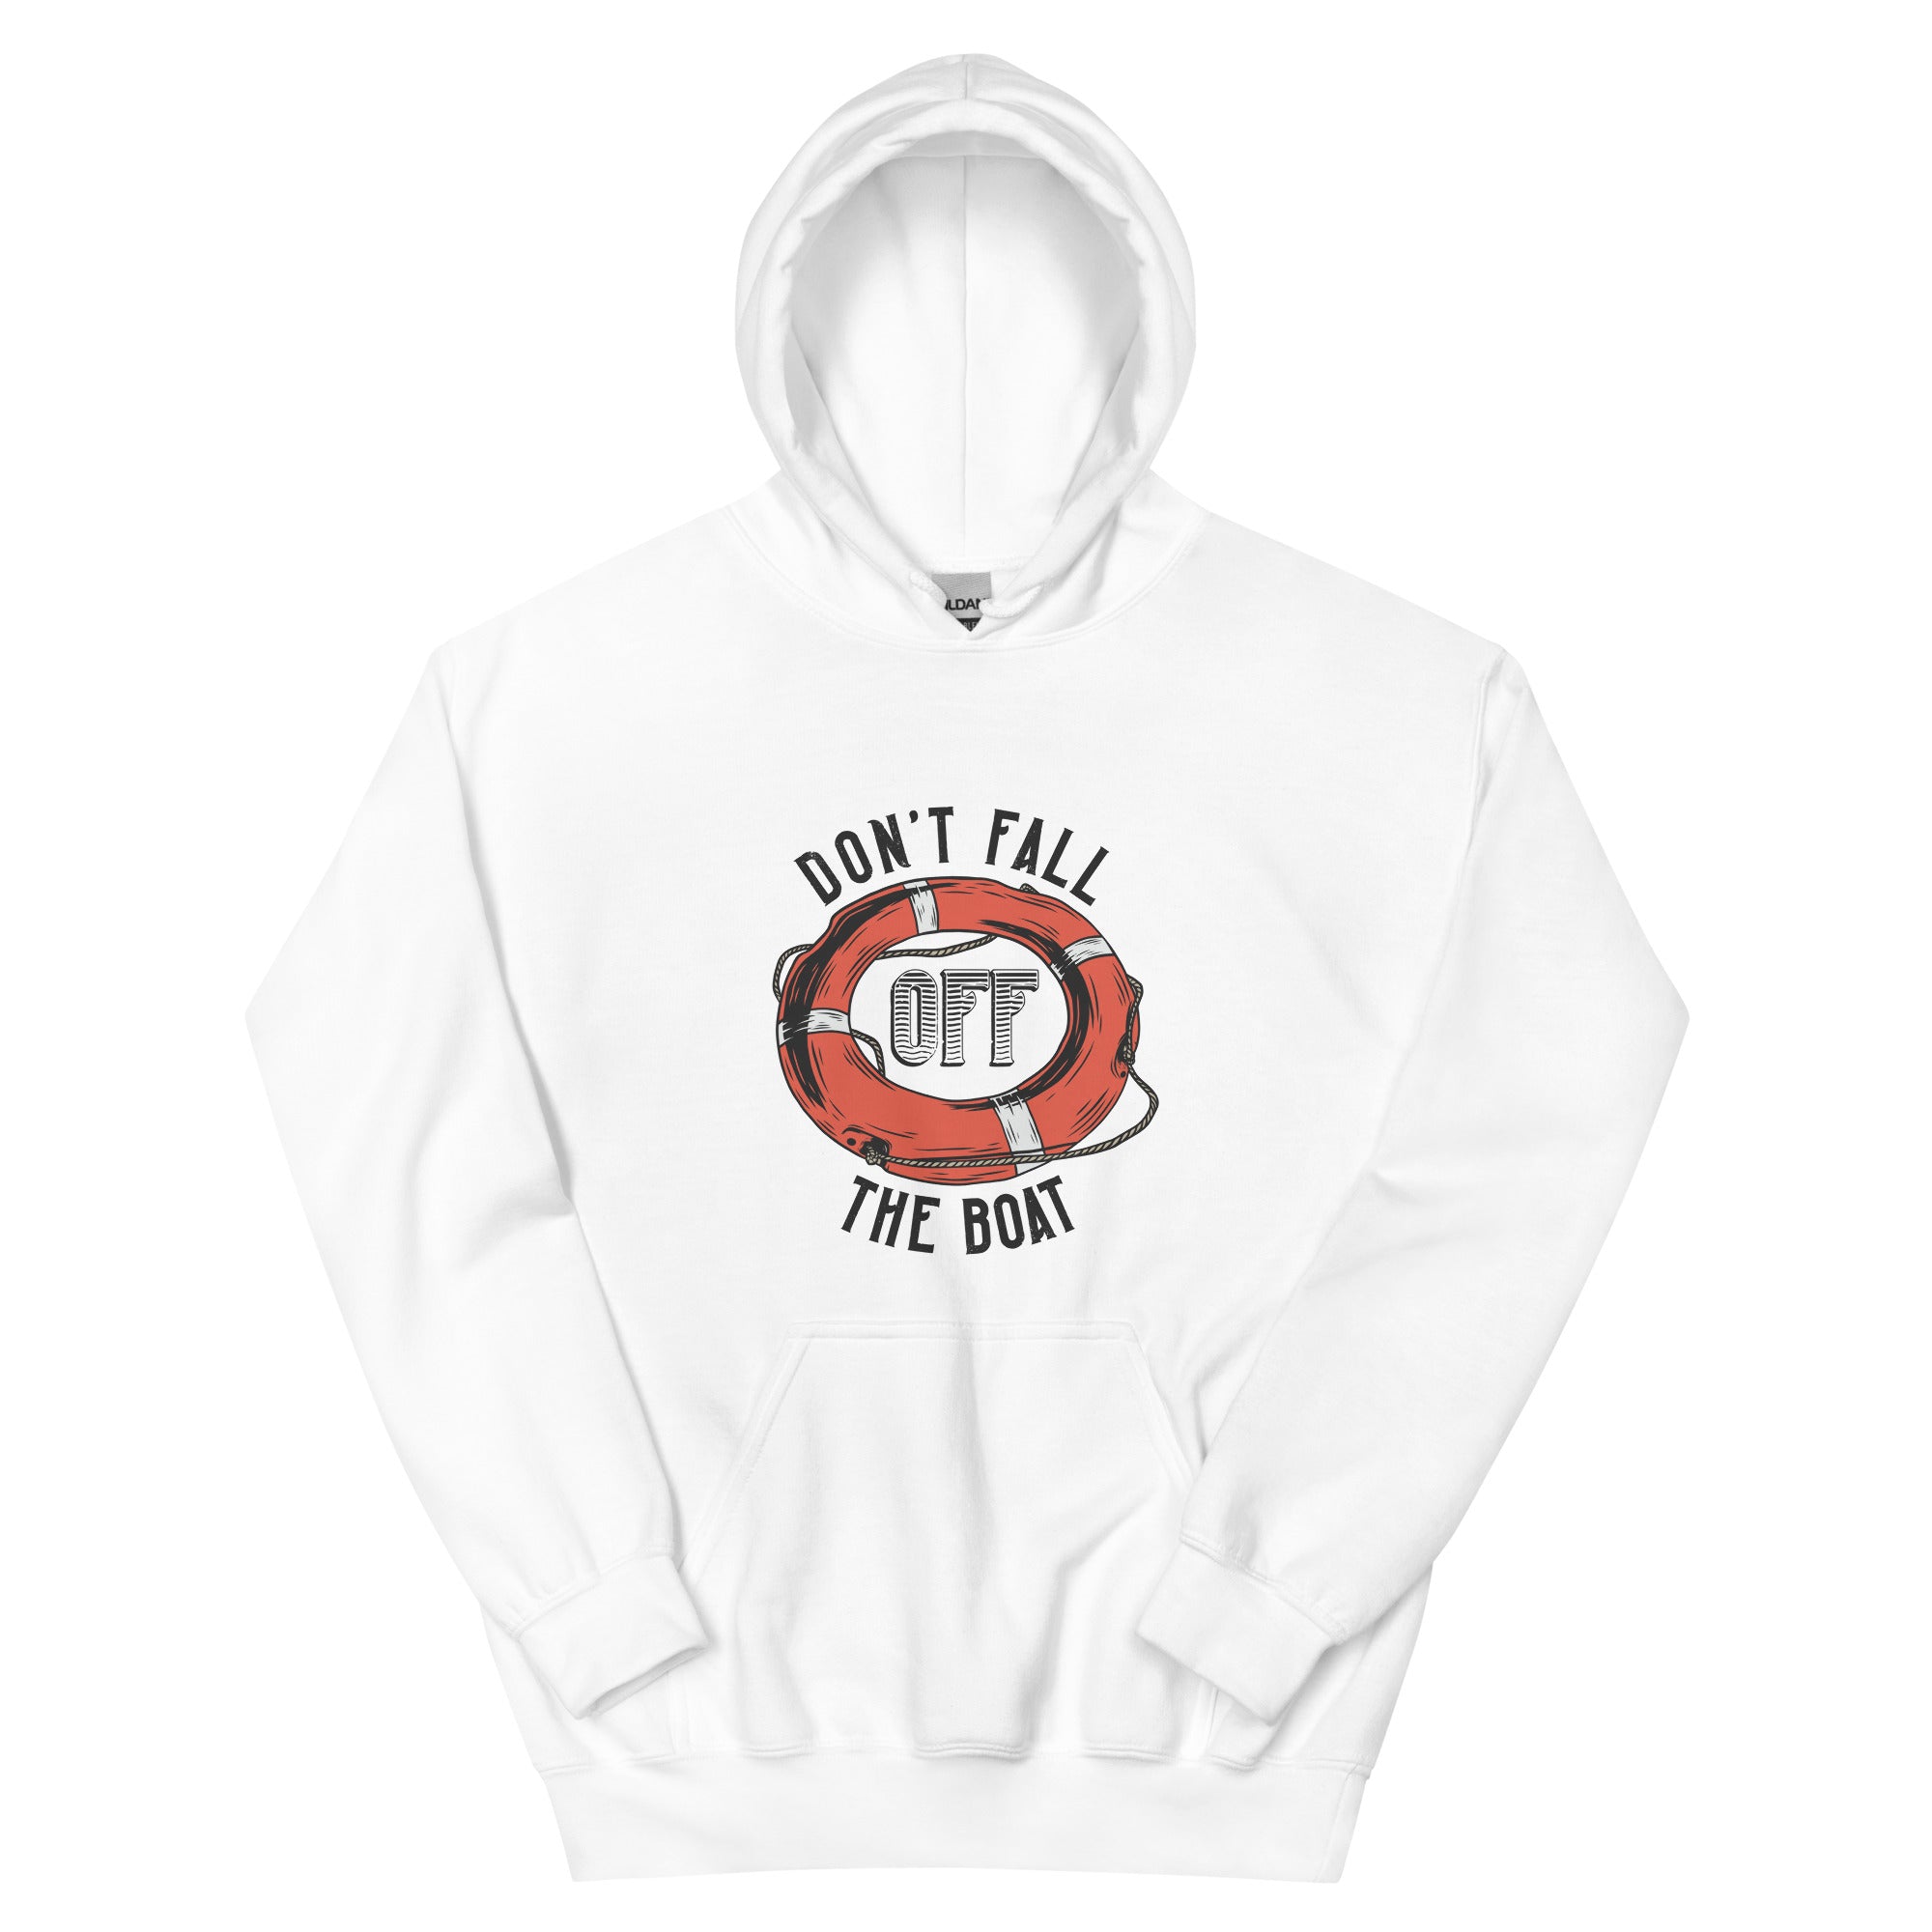 Don't Fall Off The Boat - Unisex Hoodie